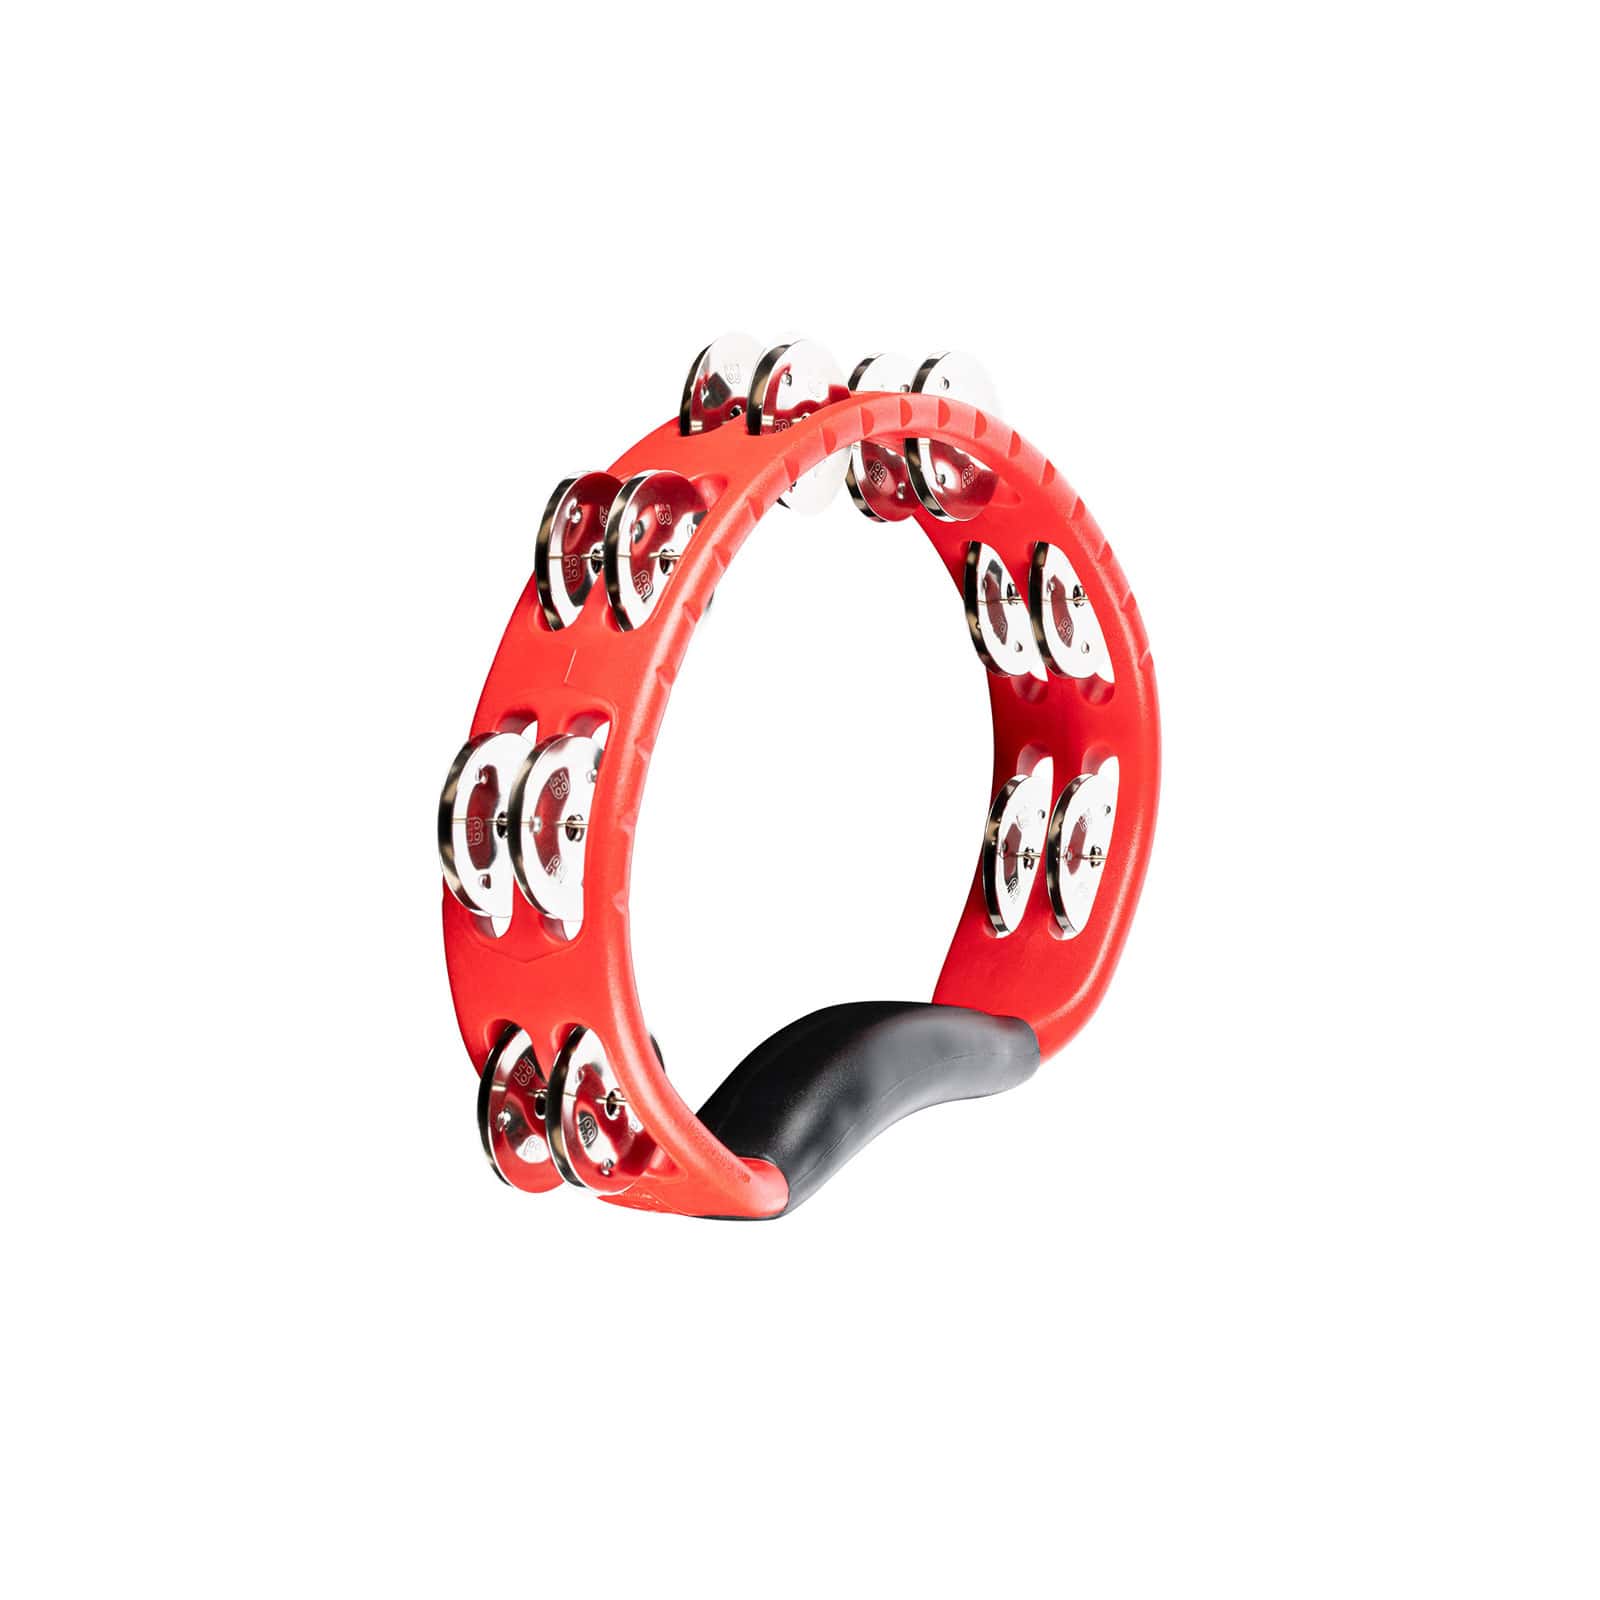 MEINL PERCUSSION HEADLINER SERIES HAND HELD ABS TAMBOURINE, DUAL ROW, RED, STAINLESS STEEL JINGLES